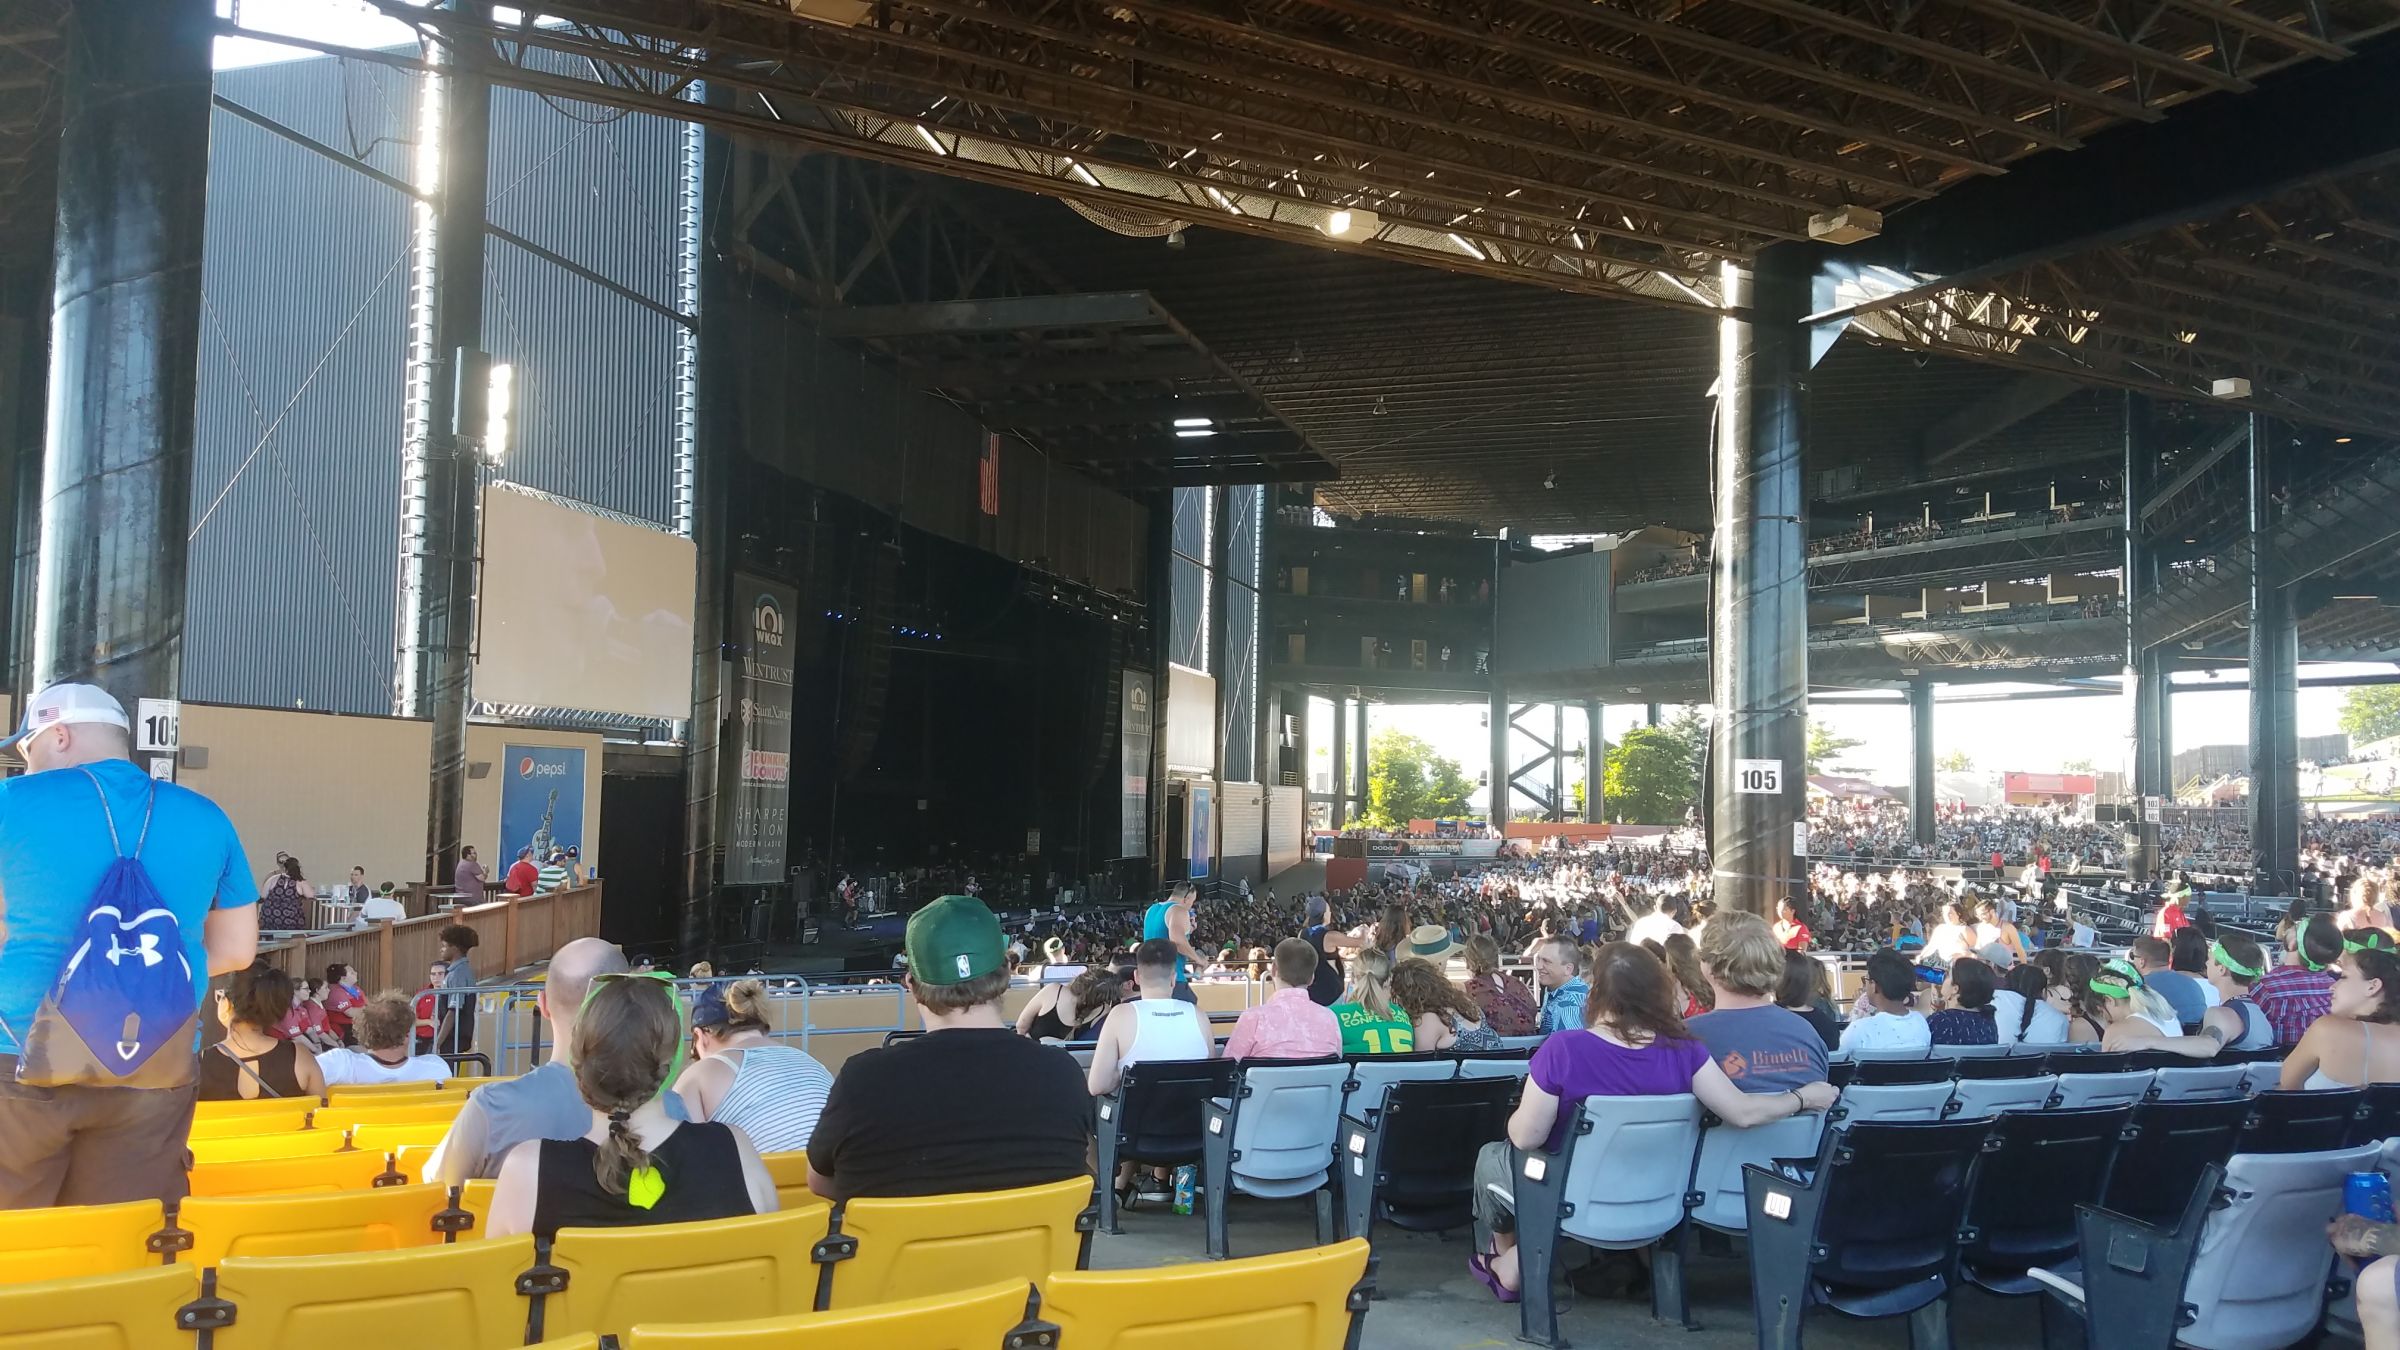 Hollywood Casino Amphitheatre Chicago Lawn Seats